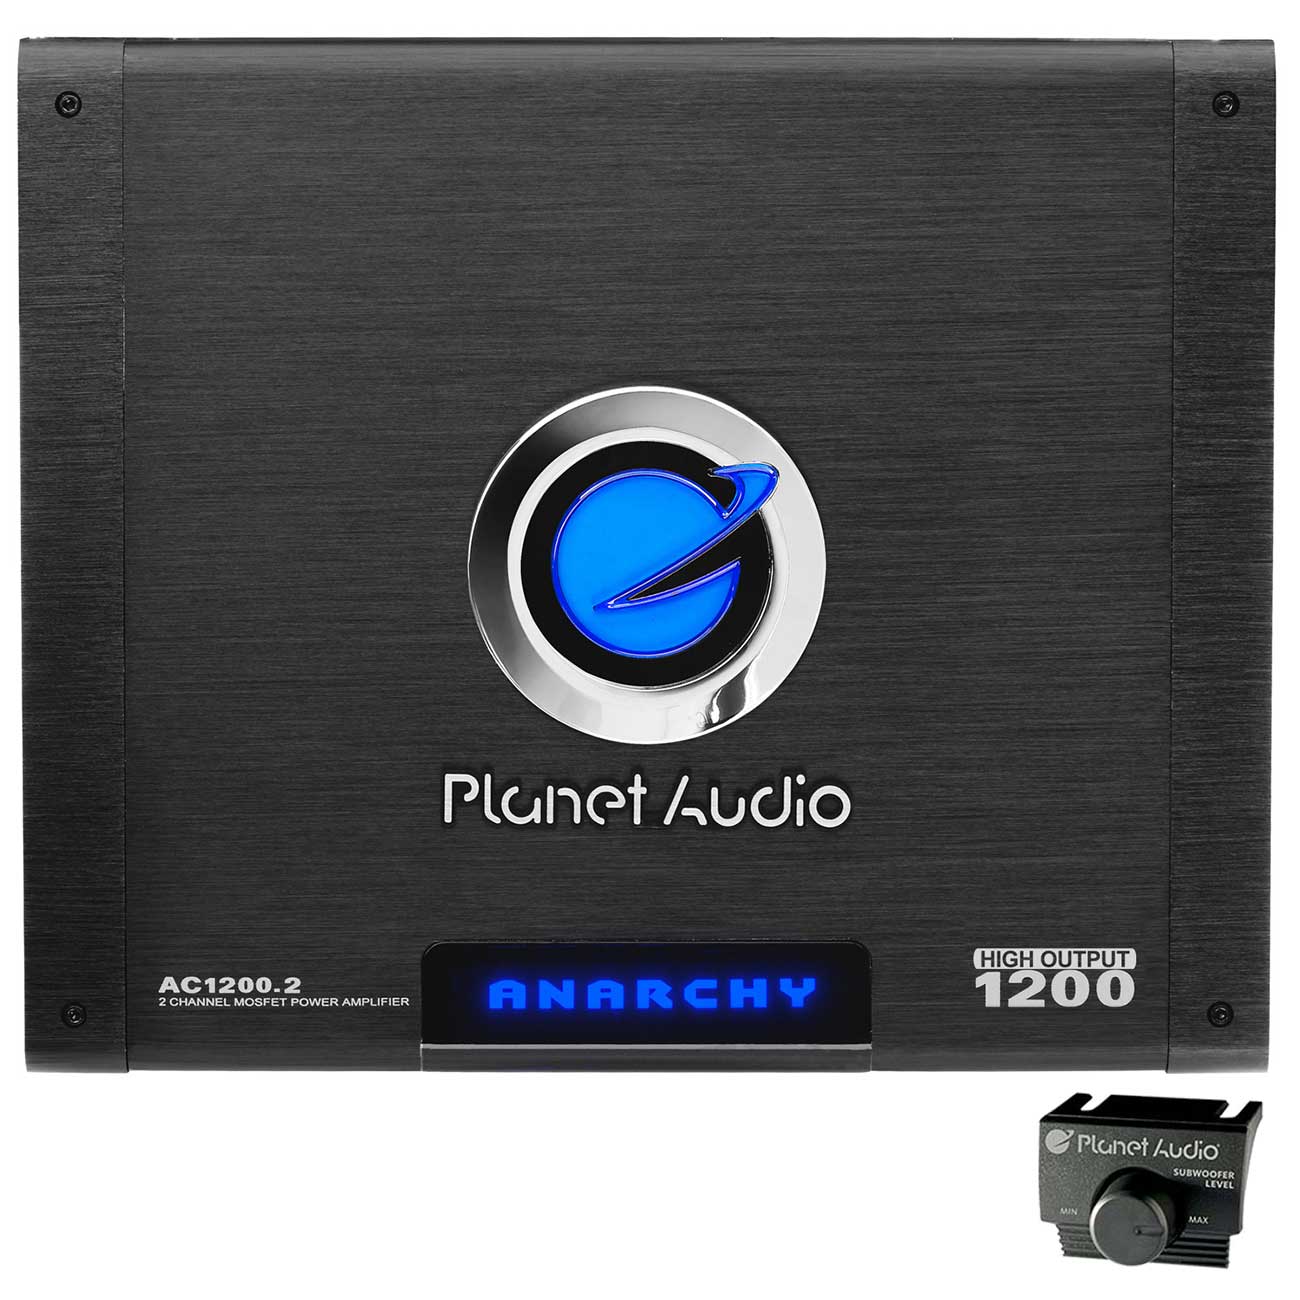 Planet Mosfet 2ch Amplifer 1200w Anarchy Series